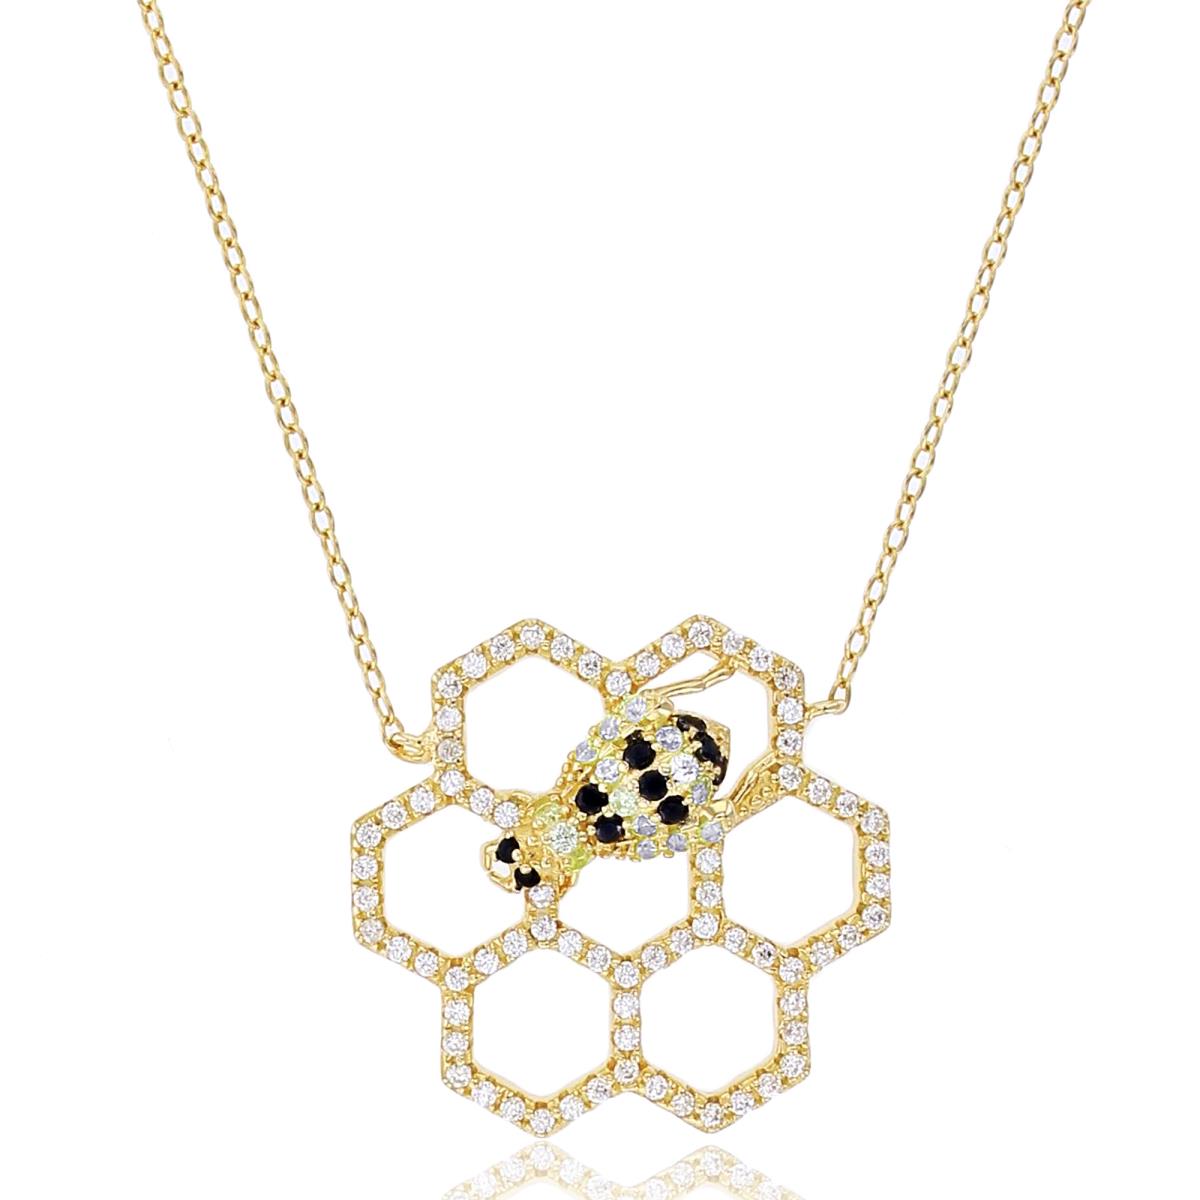 Sterling Silver+1Micron Yellow Gold Rnd White/Black/Yellow CZ Honeycomb Bee 18"Necklace